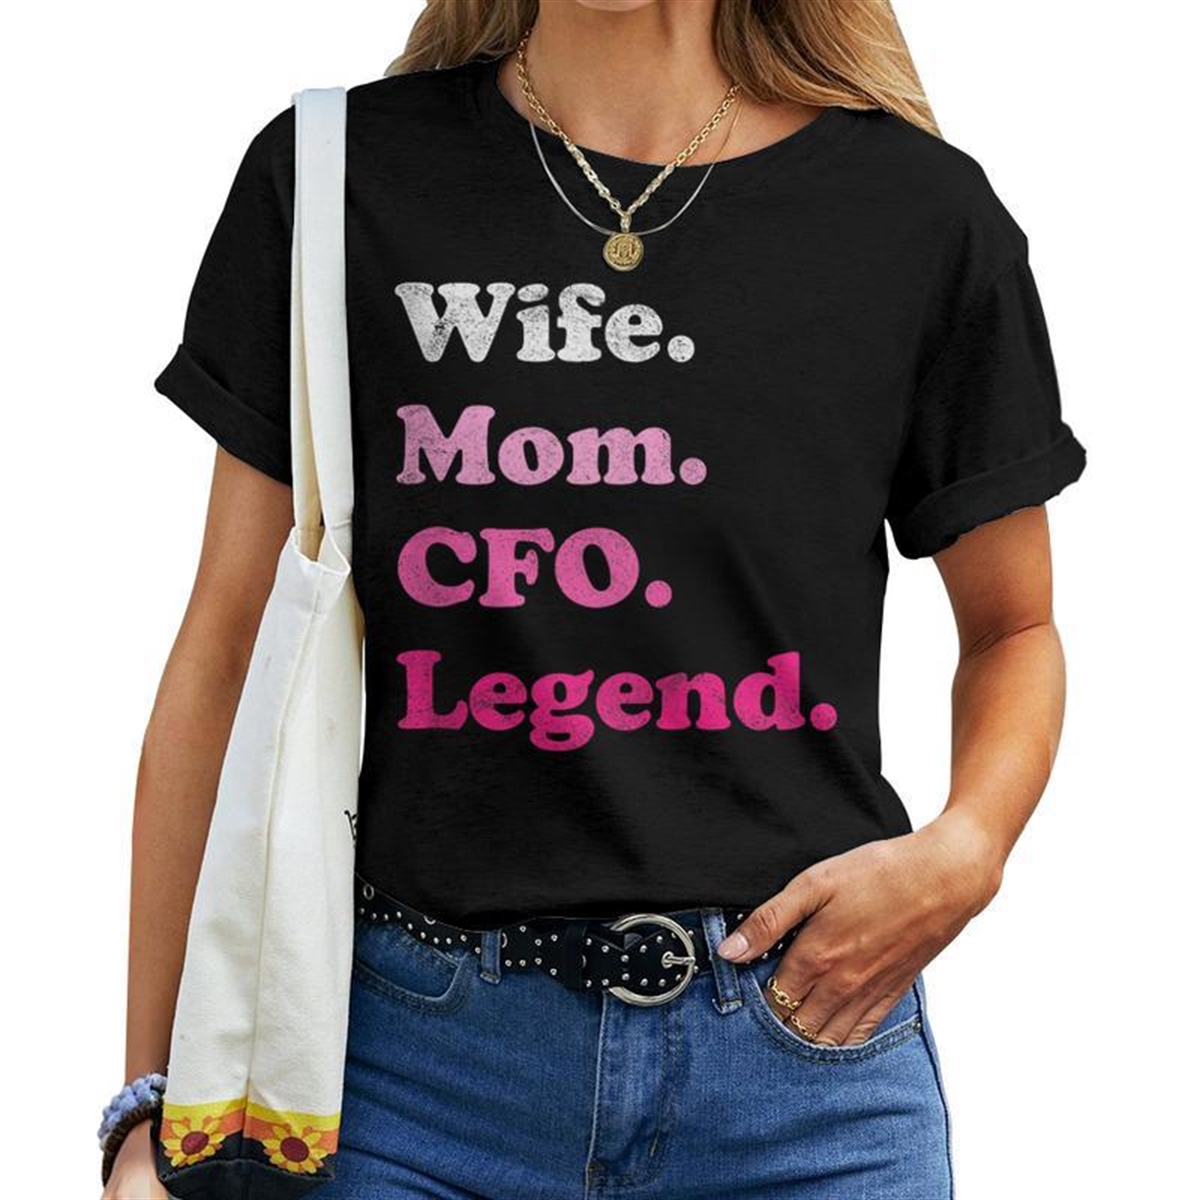 Cfo Or Chief Financial Officer For Mom Wife For Mother’s Day Women T-shirt